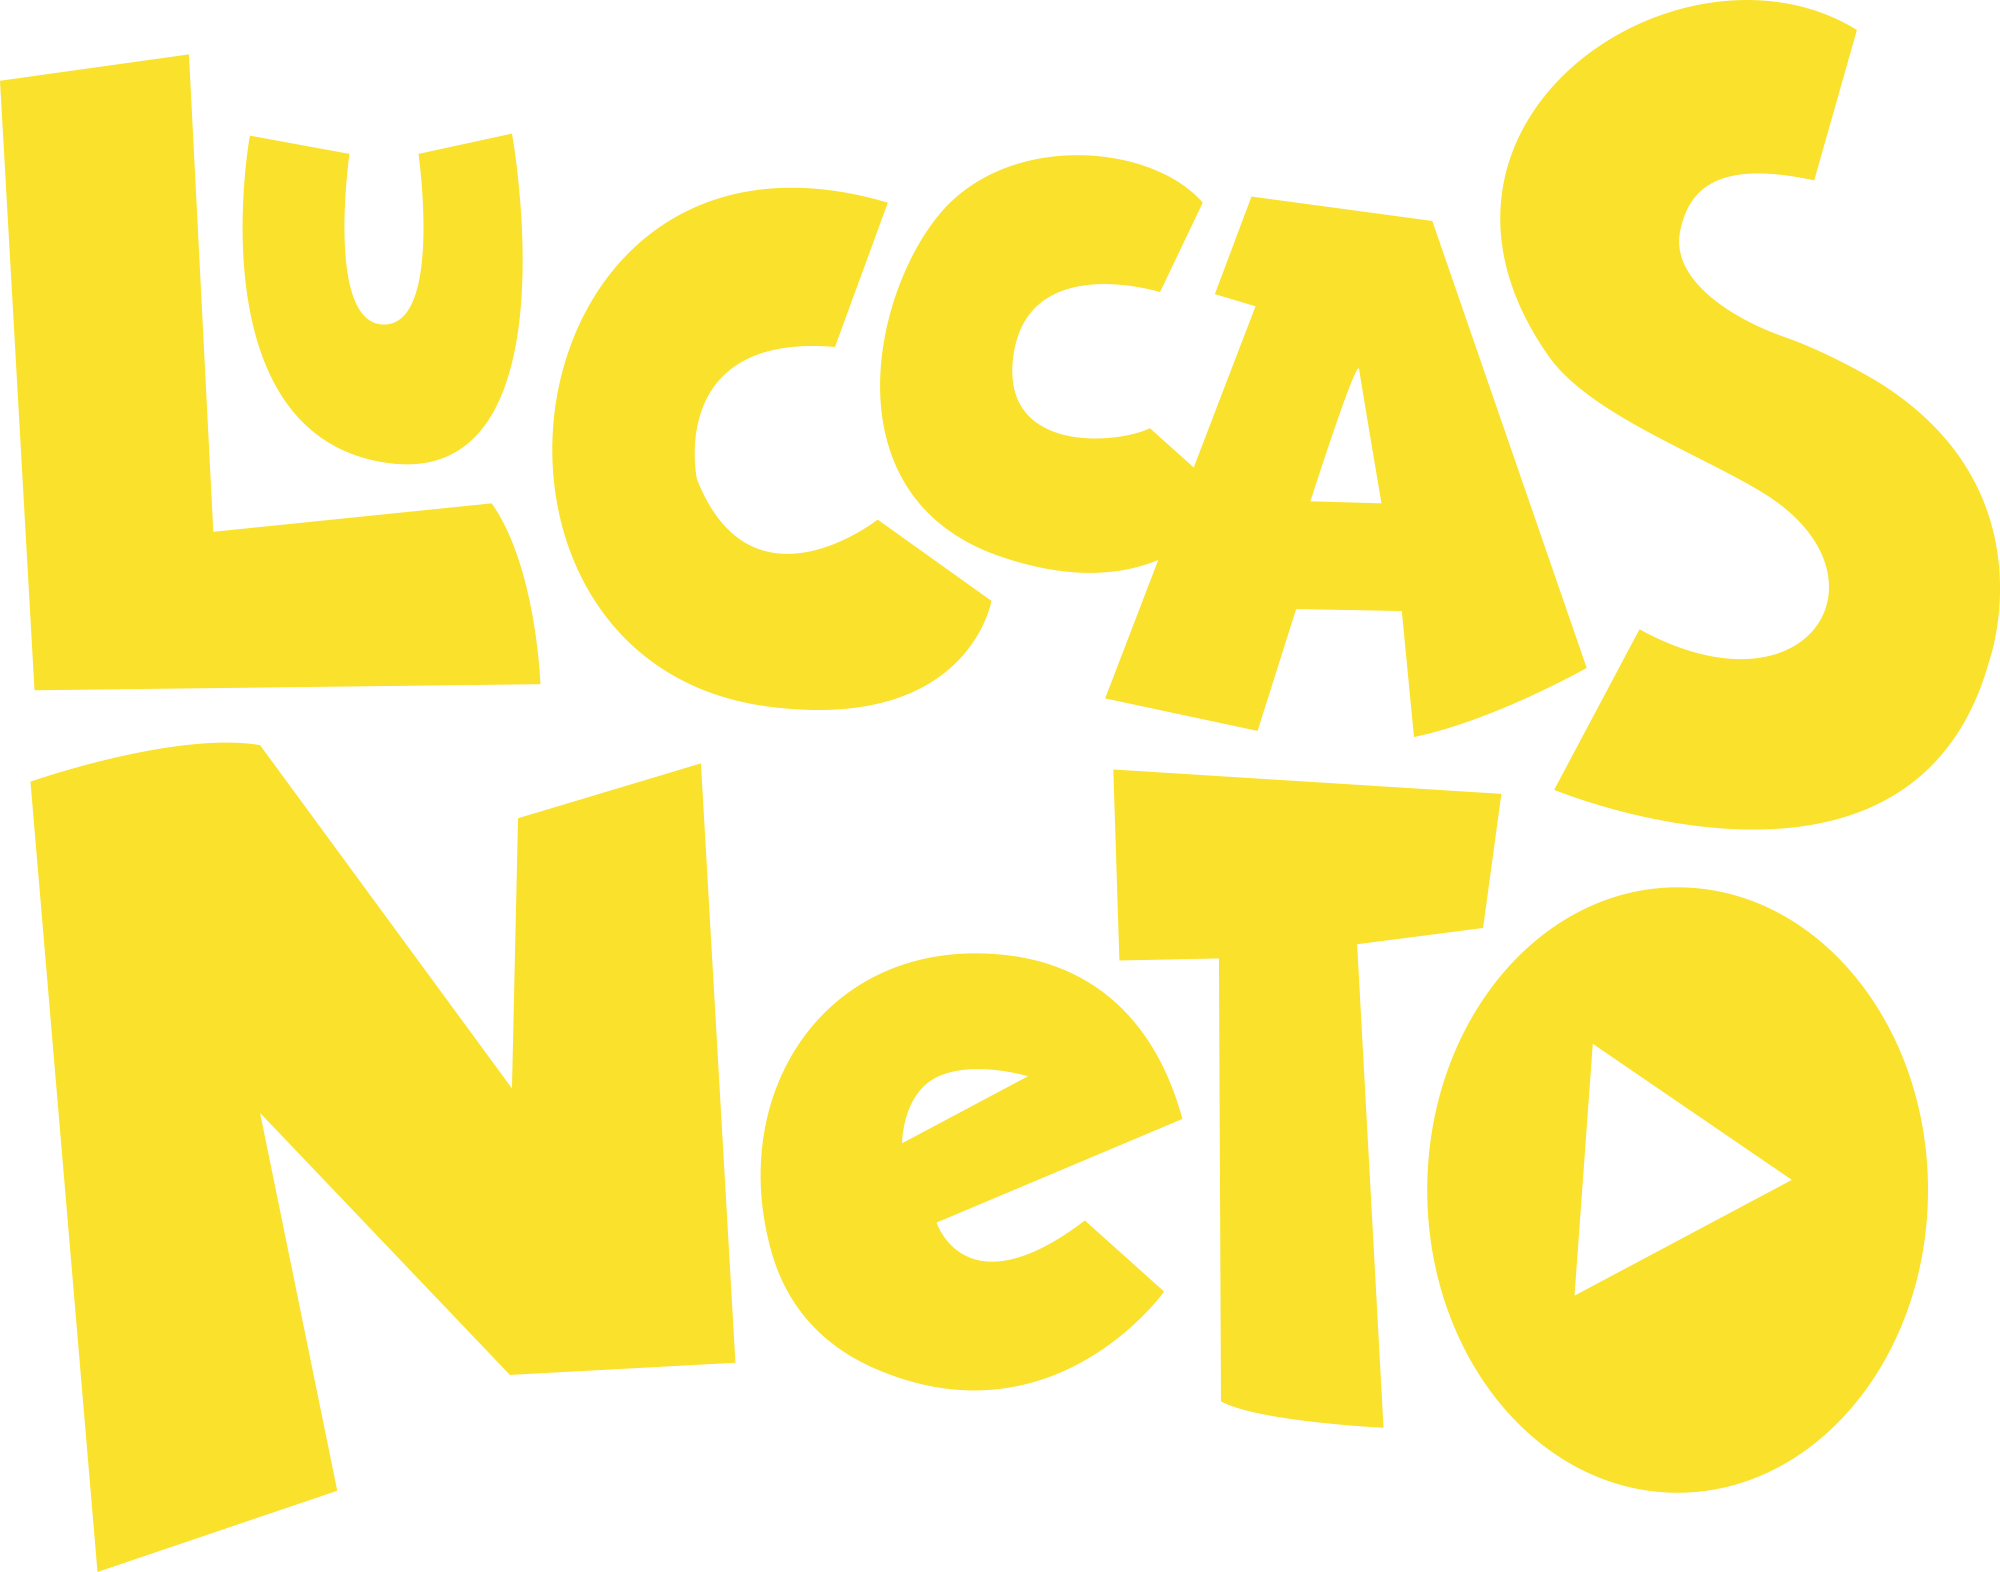 Luccas Neto Logo PNG Vector (CDR) Free Download